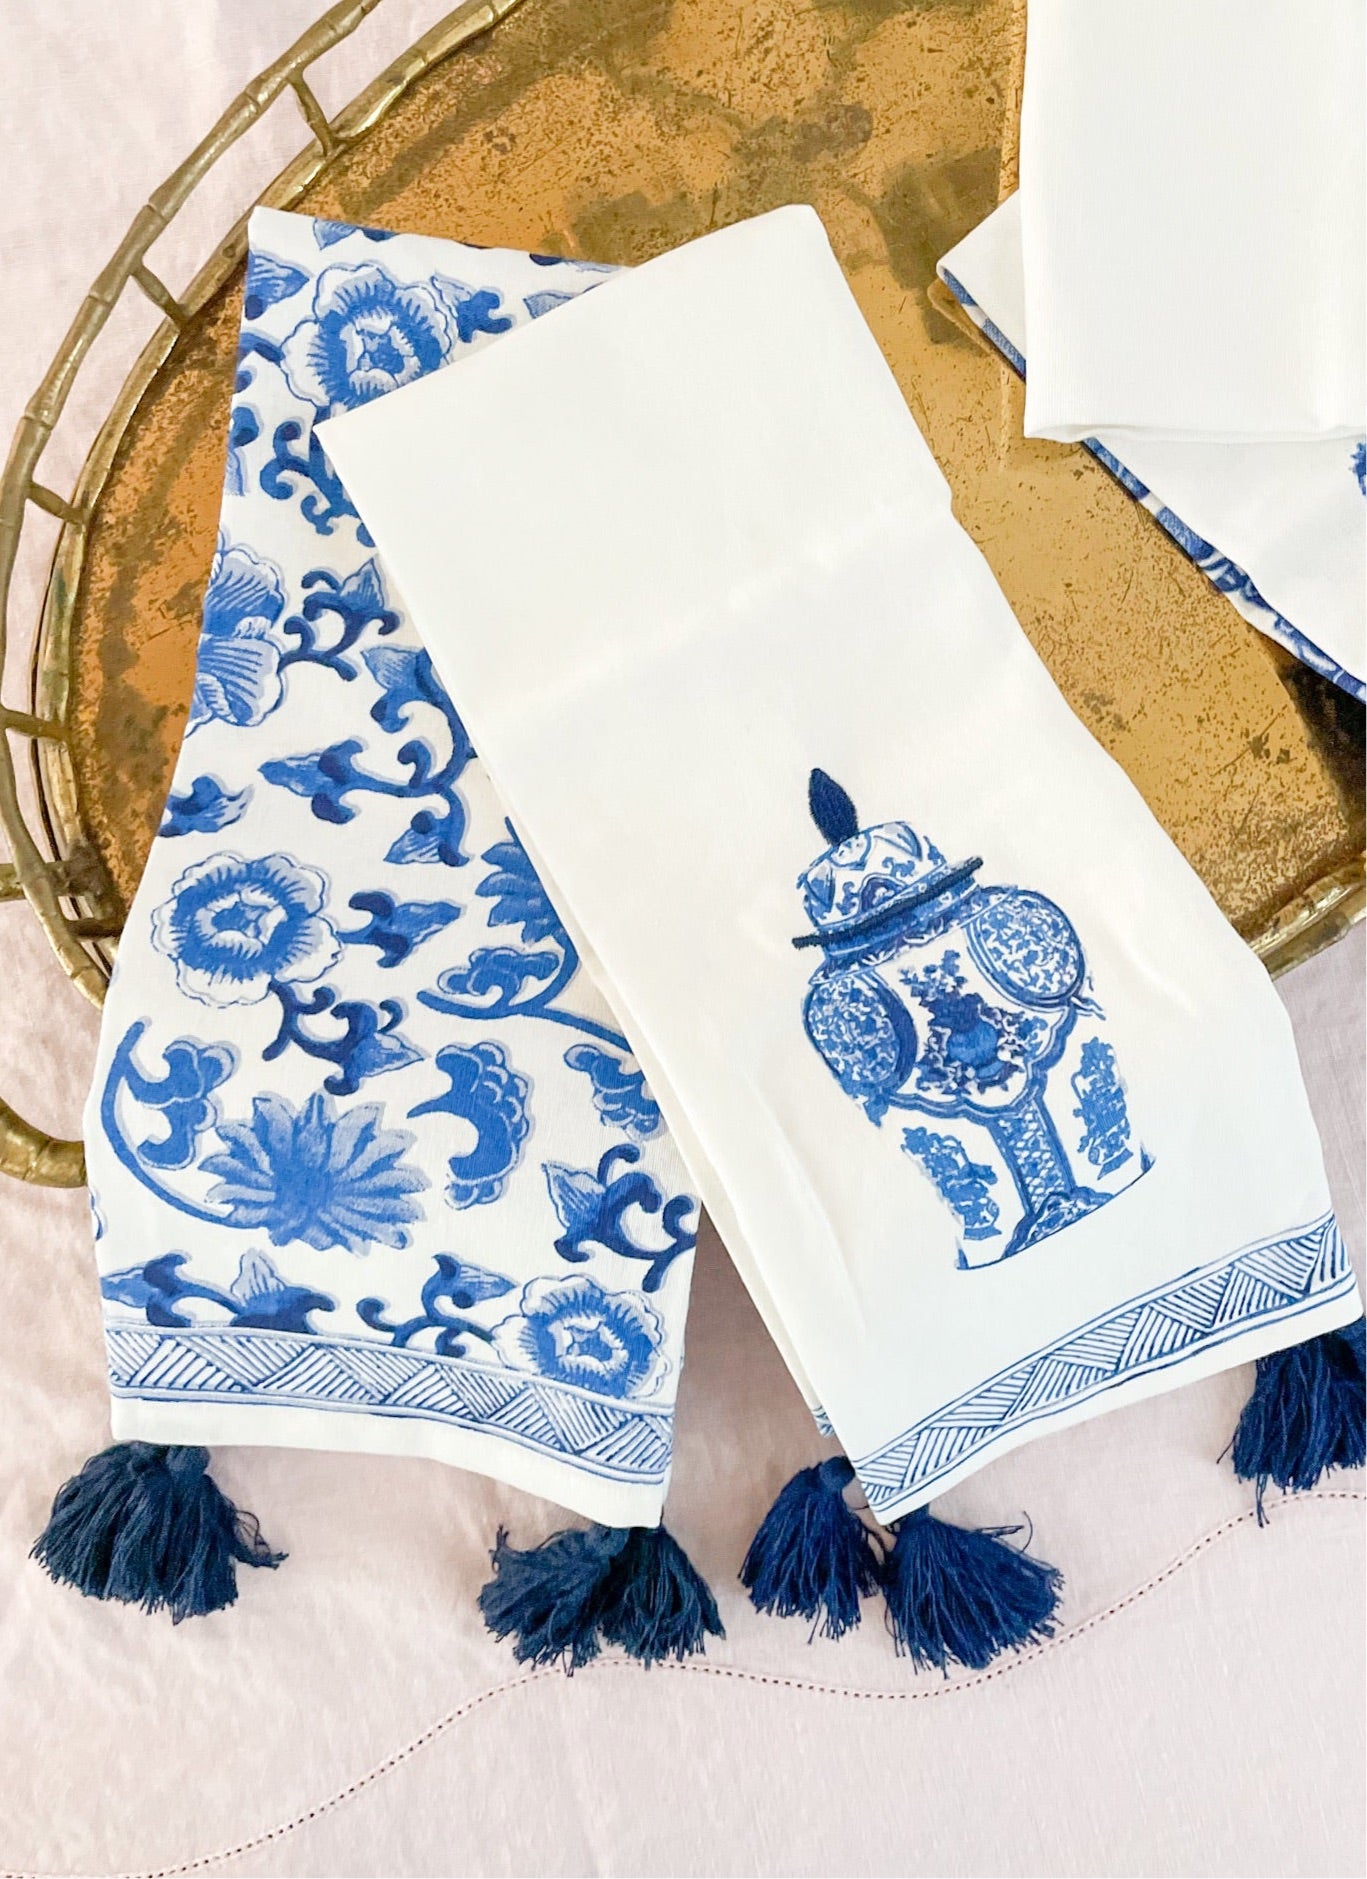 Blue And White Holiday Dish Towels Designs - Gary's Wine & Marketplace